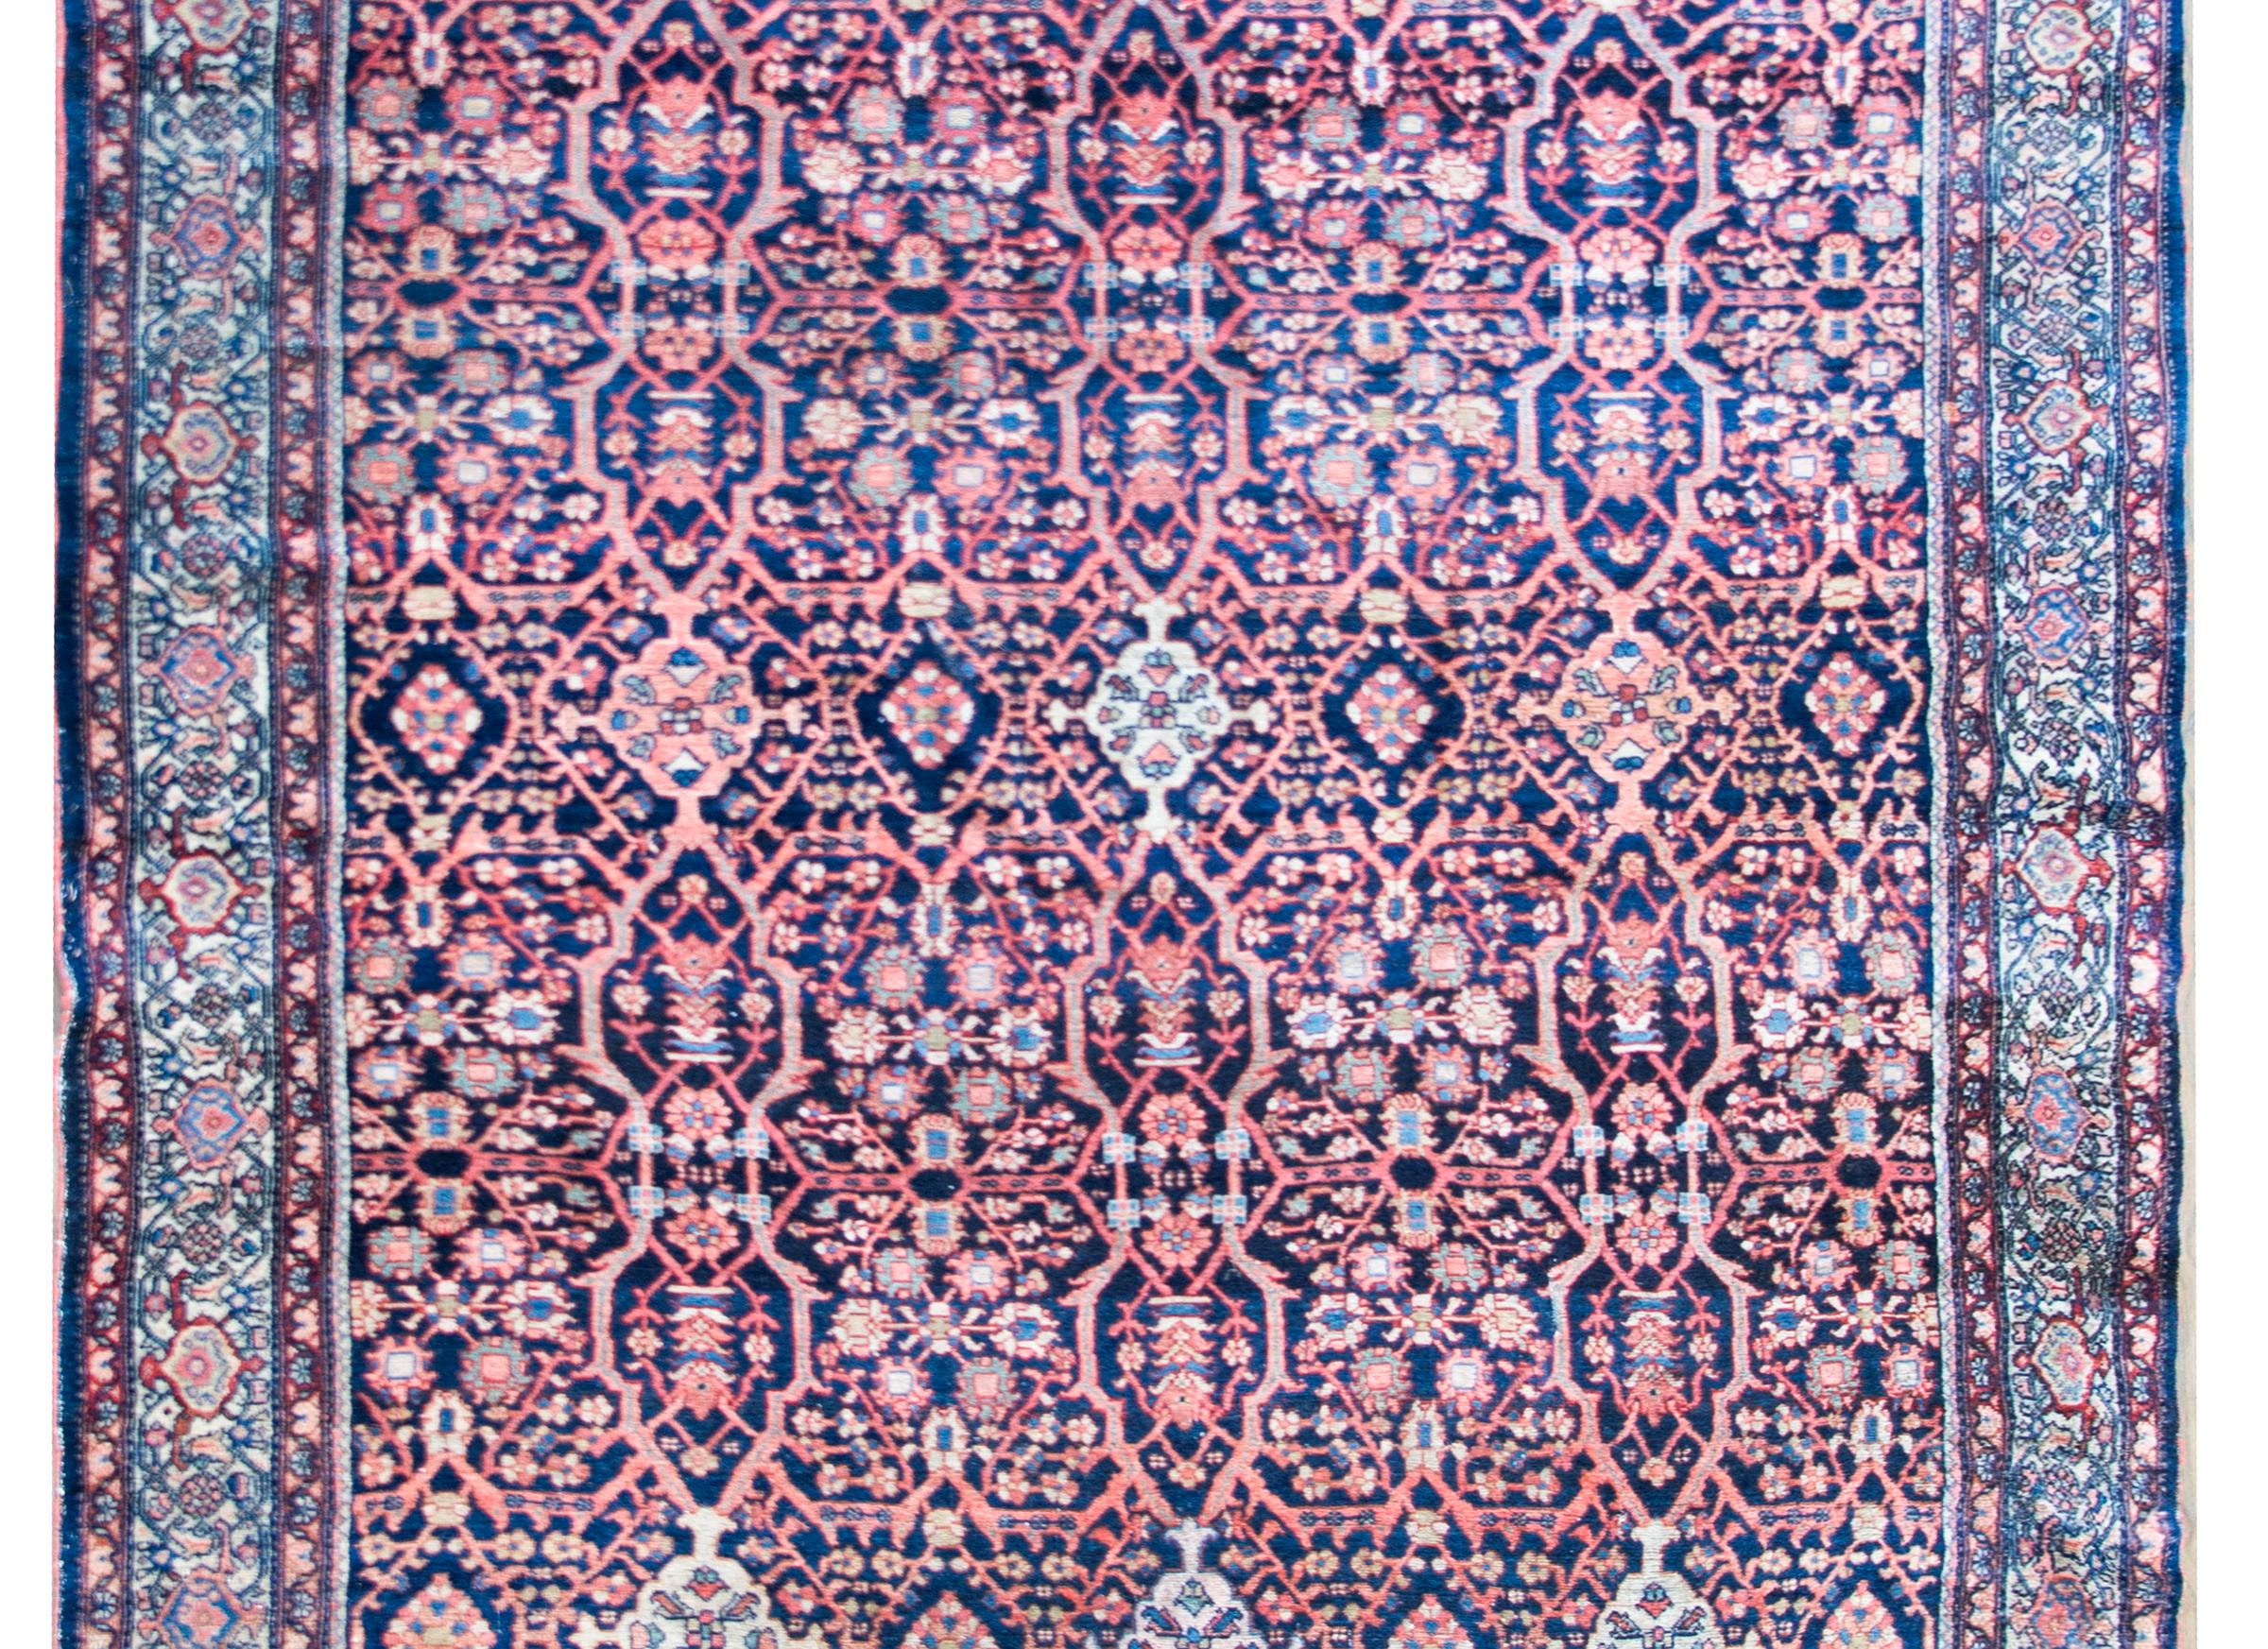 A fantastic early 20th century Persian Mission Malayer rug with an all-over floral trellis pattern containing myriad flowers woven in various colors including light and dark indigo, pink, green, cream, and crimson, and surrounded by a wonderful